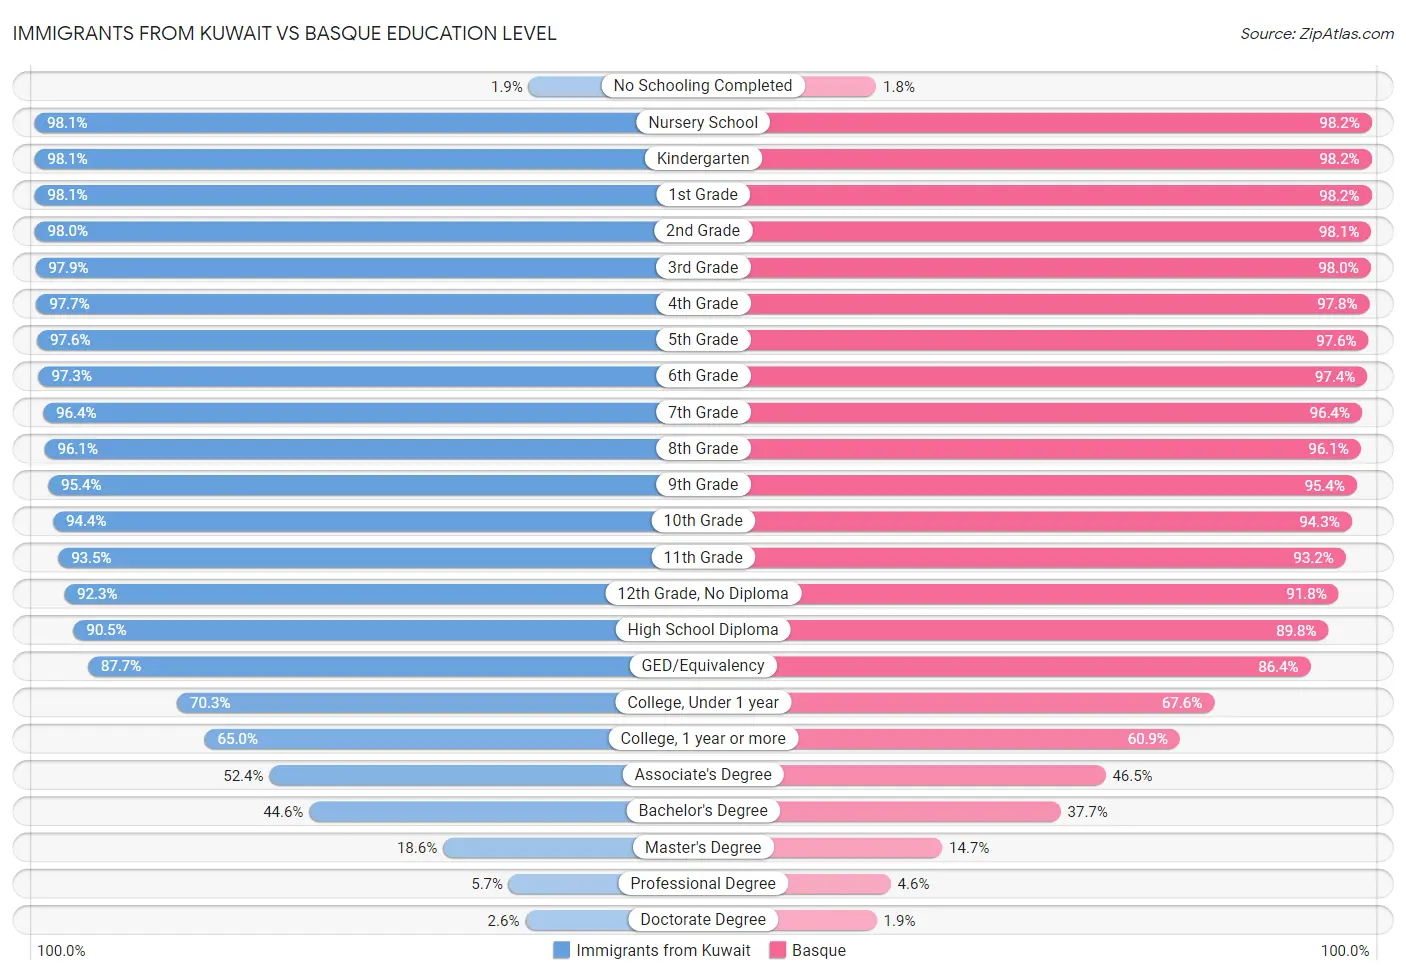 Immigrants from Kuwait vs Basque Education Level